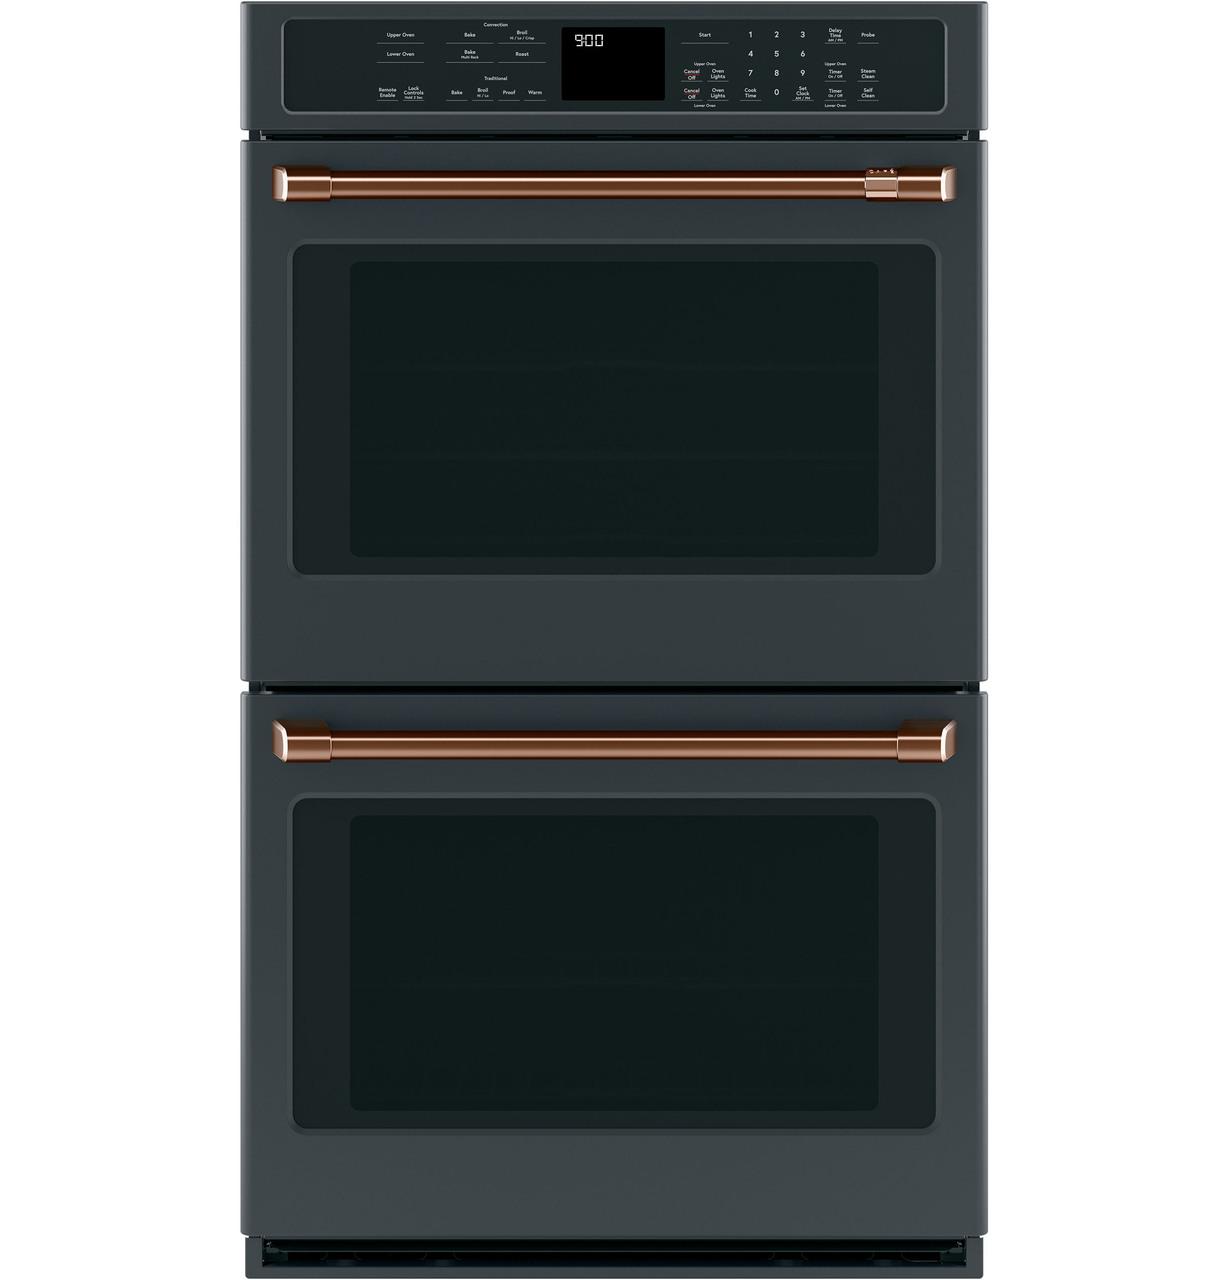 Cafe Caf(eback)™ 2 - 30" Double Wall Oven Handles - Brushed Copper